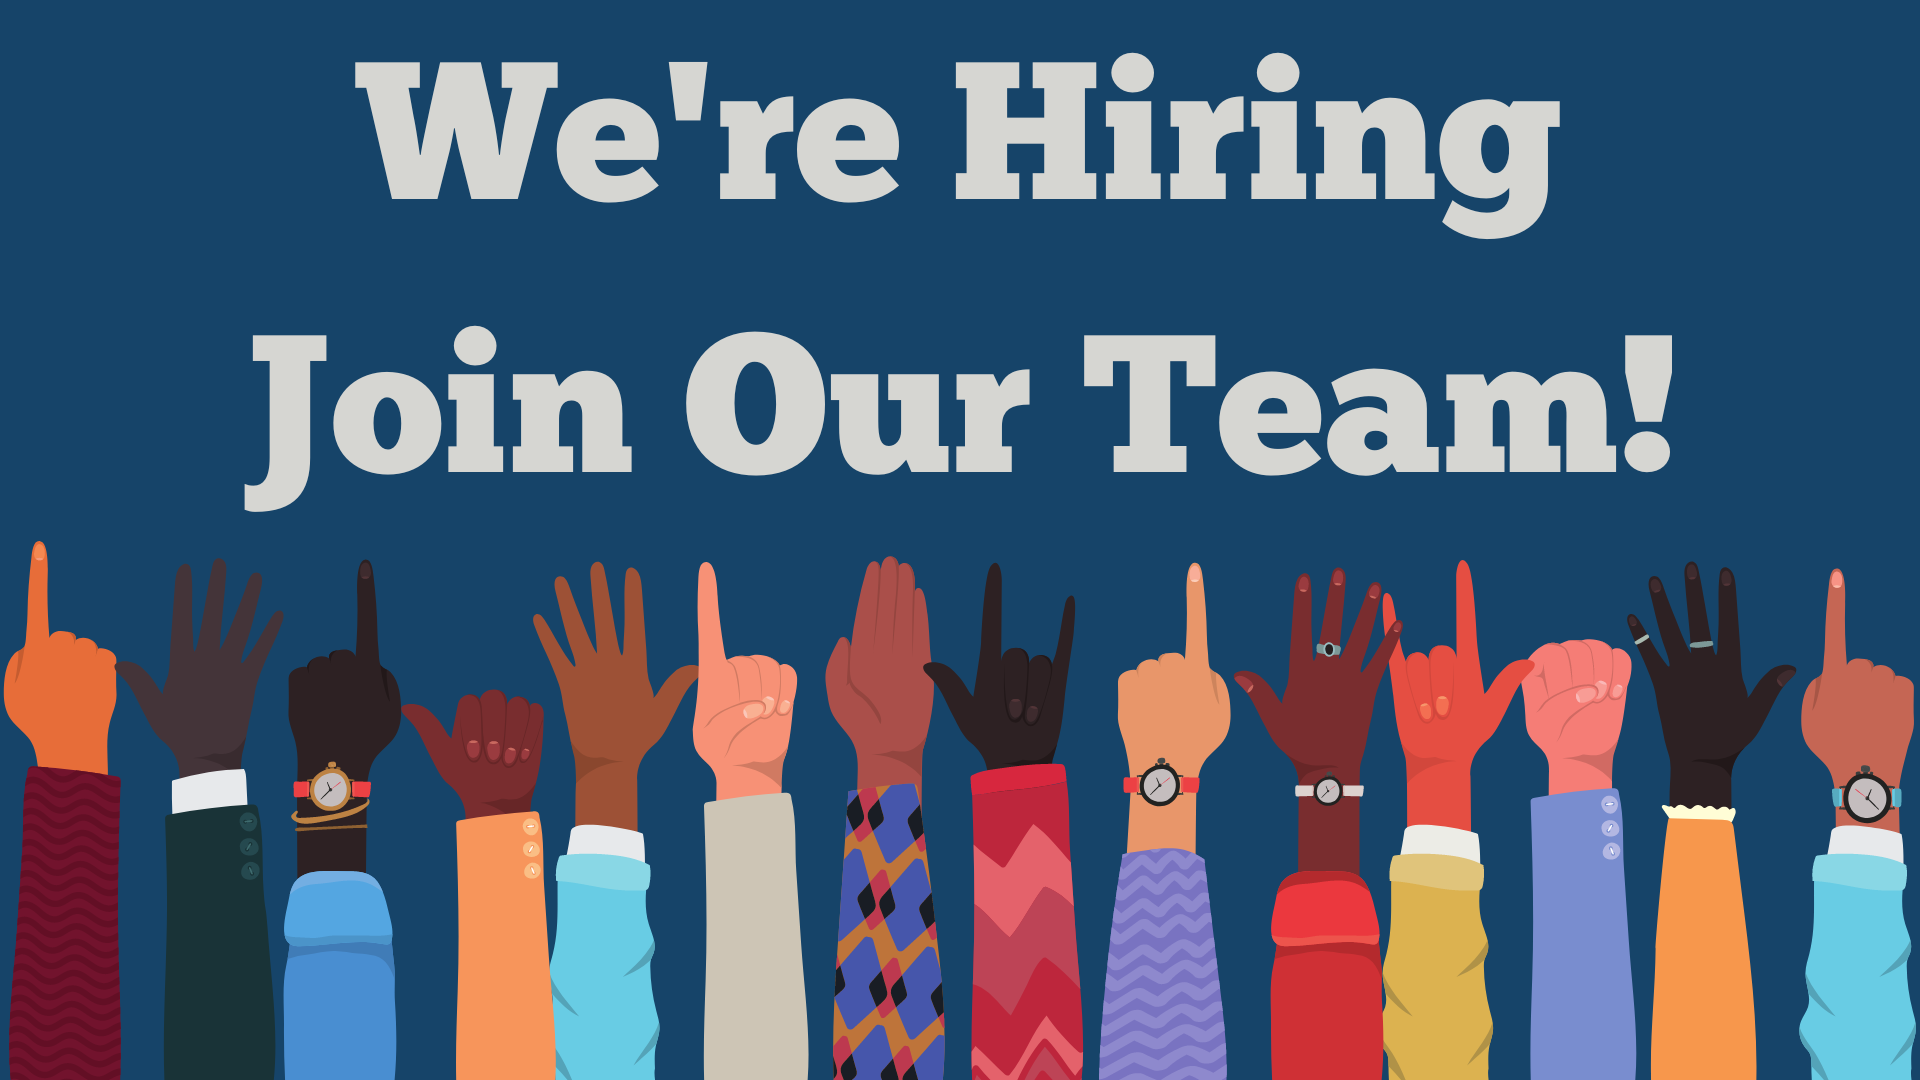 We're hiring join our team cartoon image of a variety of people raising hands